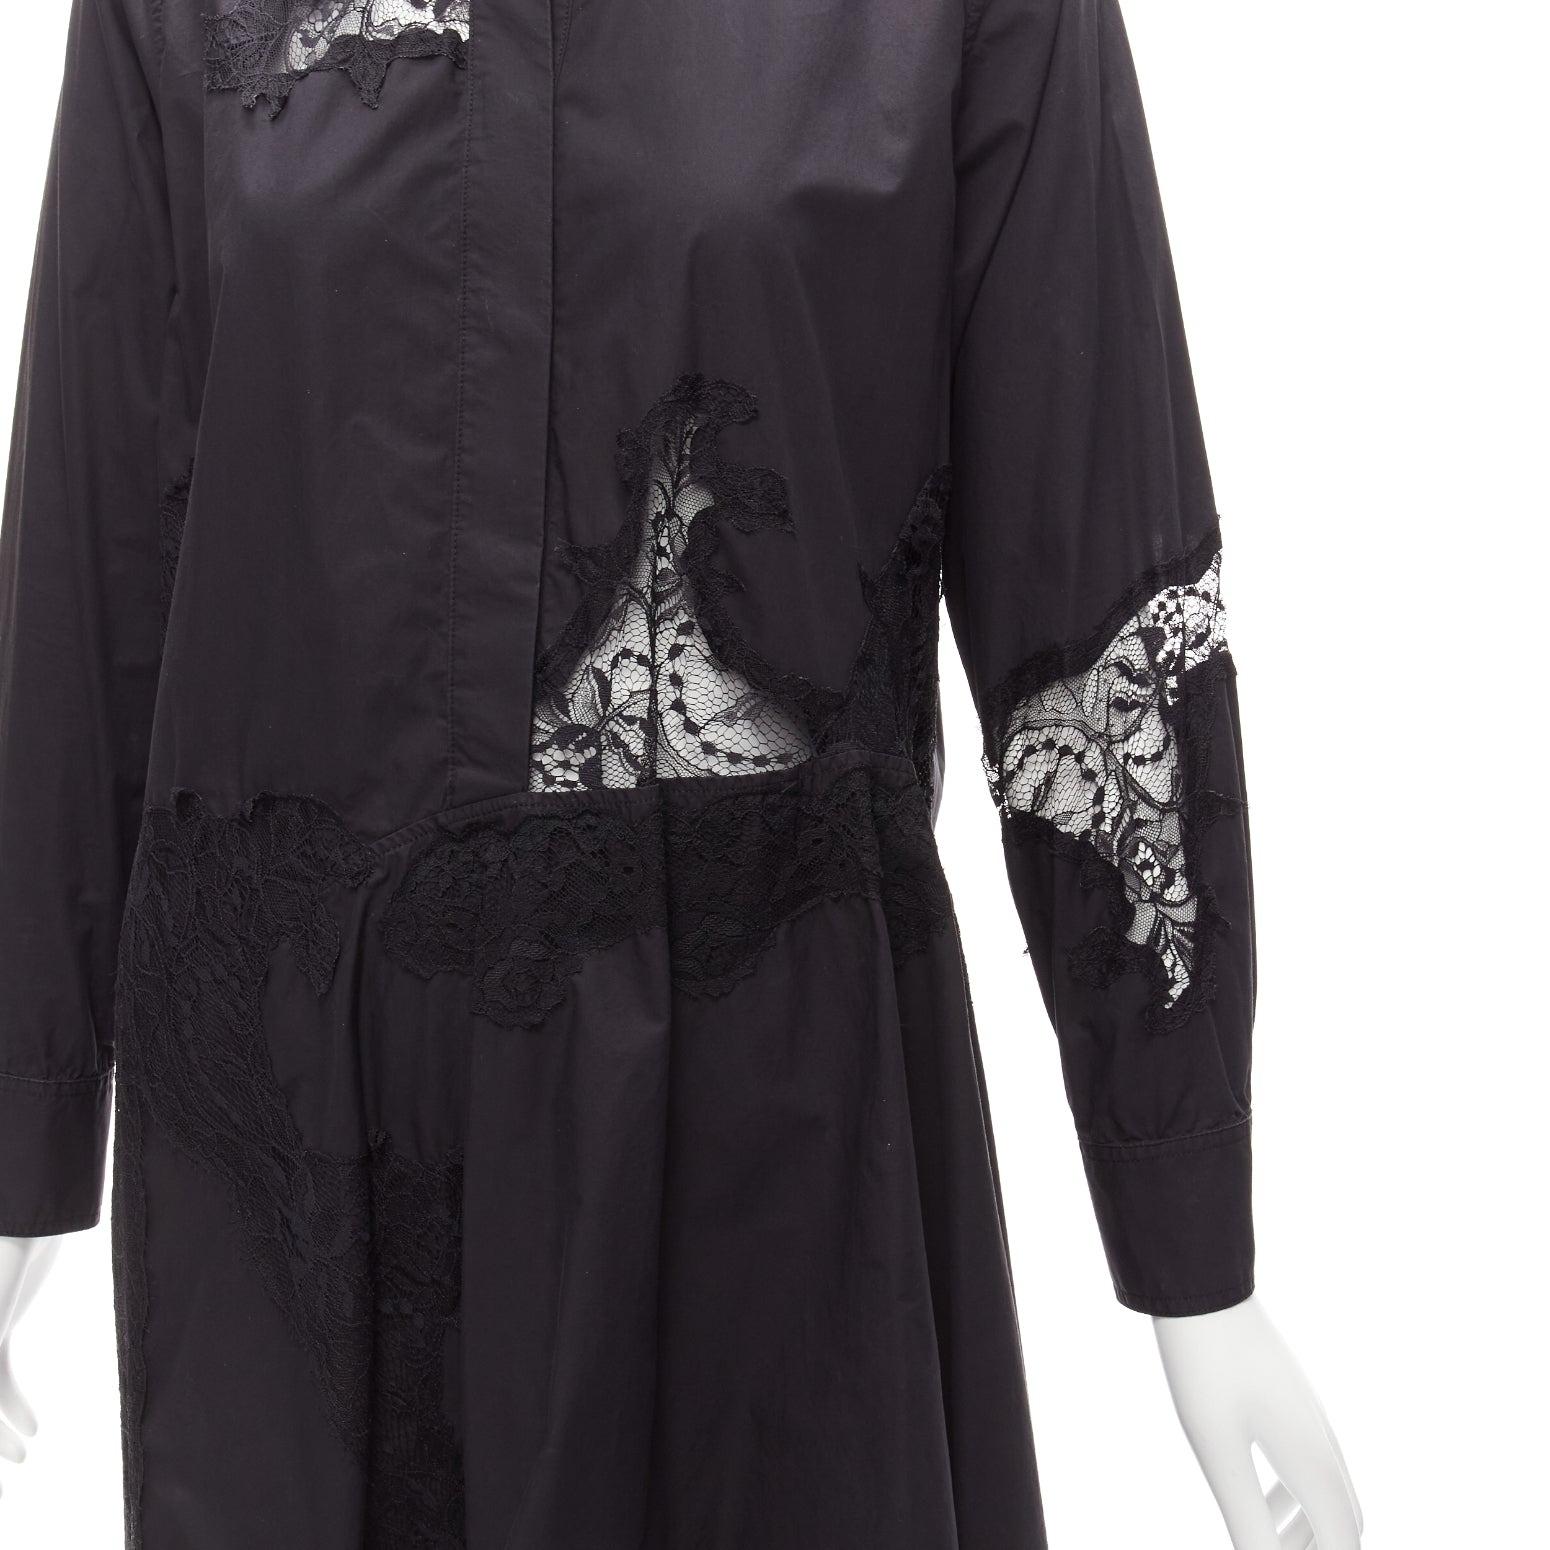 MARQUES ALMEIDA 100% cotton black lace applique cut out bias shirt dress XS
Reference: JACG/A00140
Brand: Marques Almeida
Material: Cotton
Color: Black
Pattern: Lace
Closure: Button
Extra Details: Concealed button placket.
Made in: